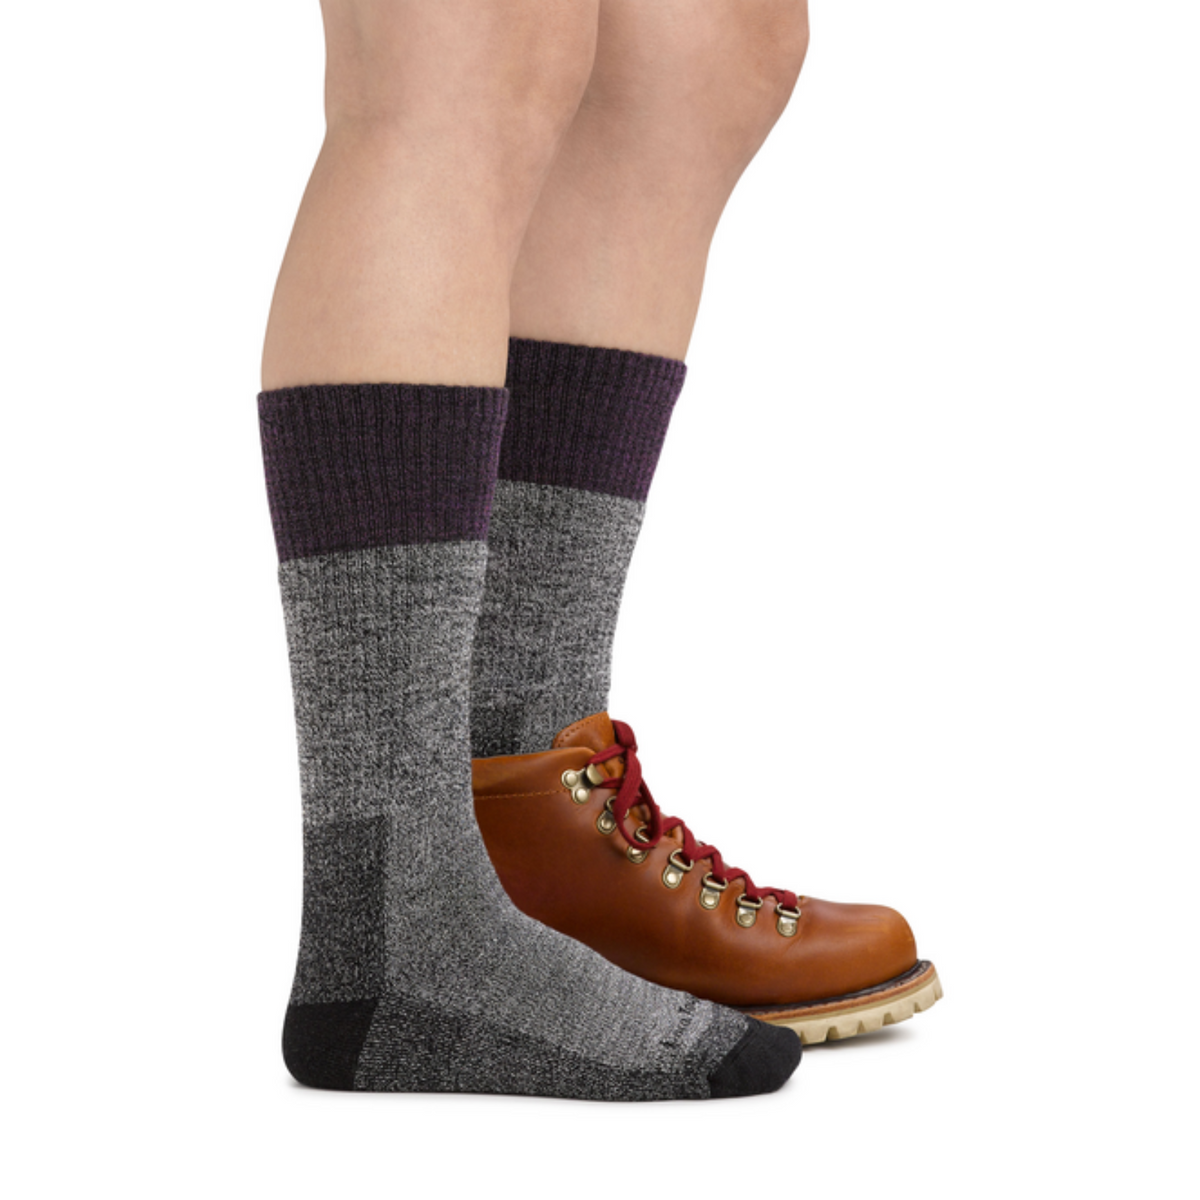 Darn Tough 1983 Scout Midweight Hiking Boot women&#39;s sock featuring grey sock with purple cuff worn by model wearing one hiking boot to show the size